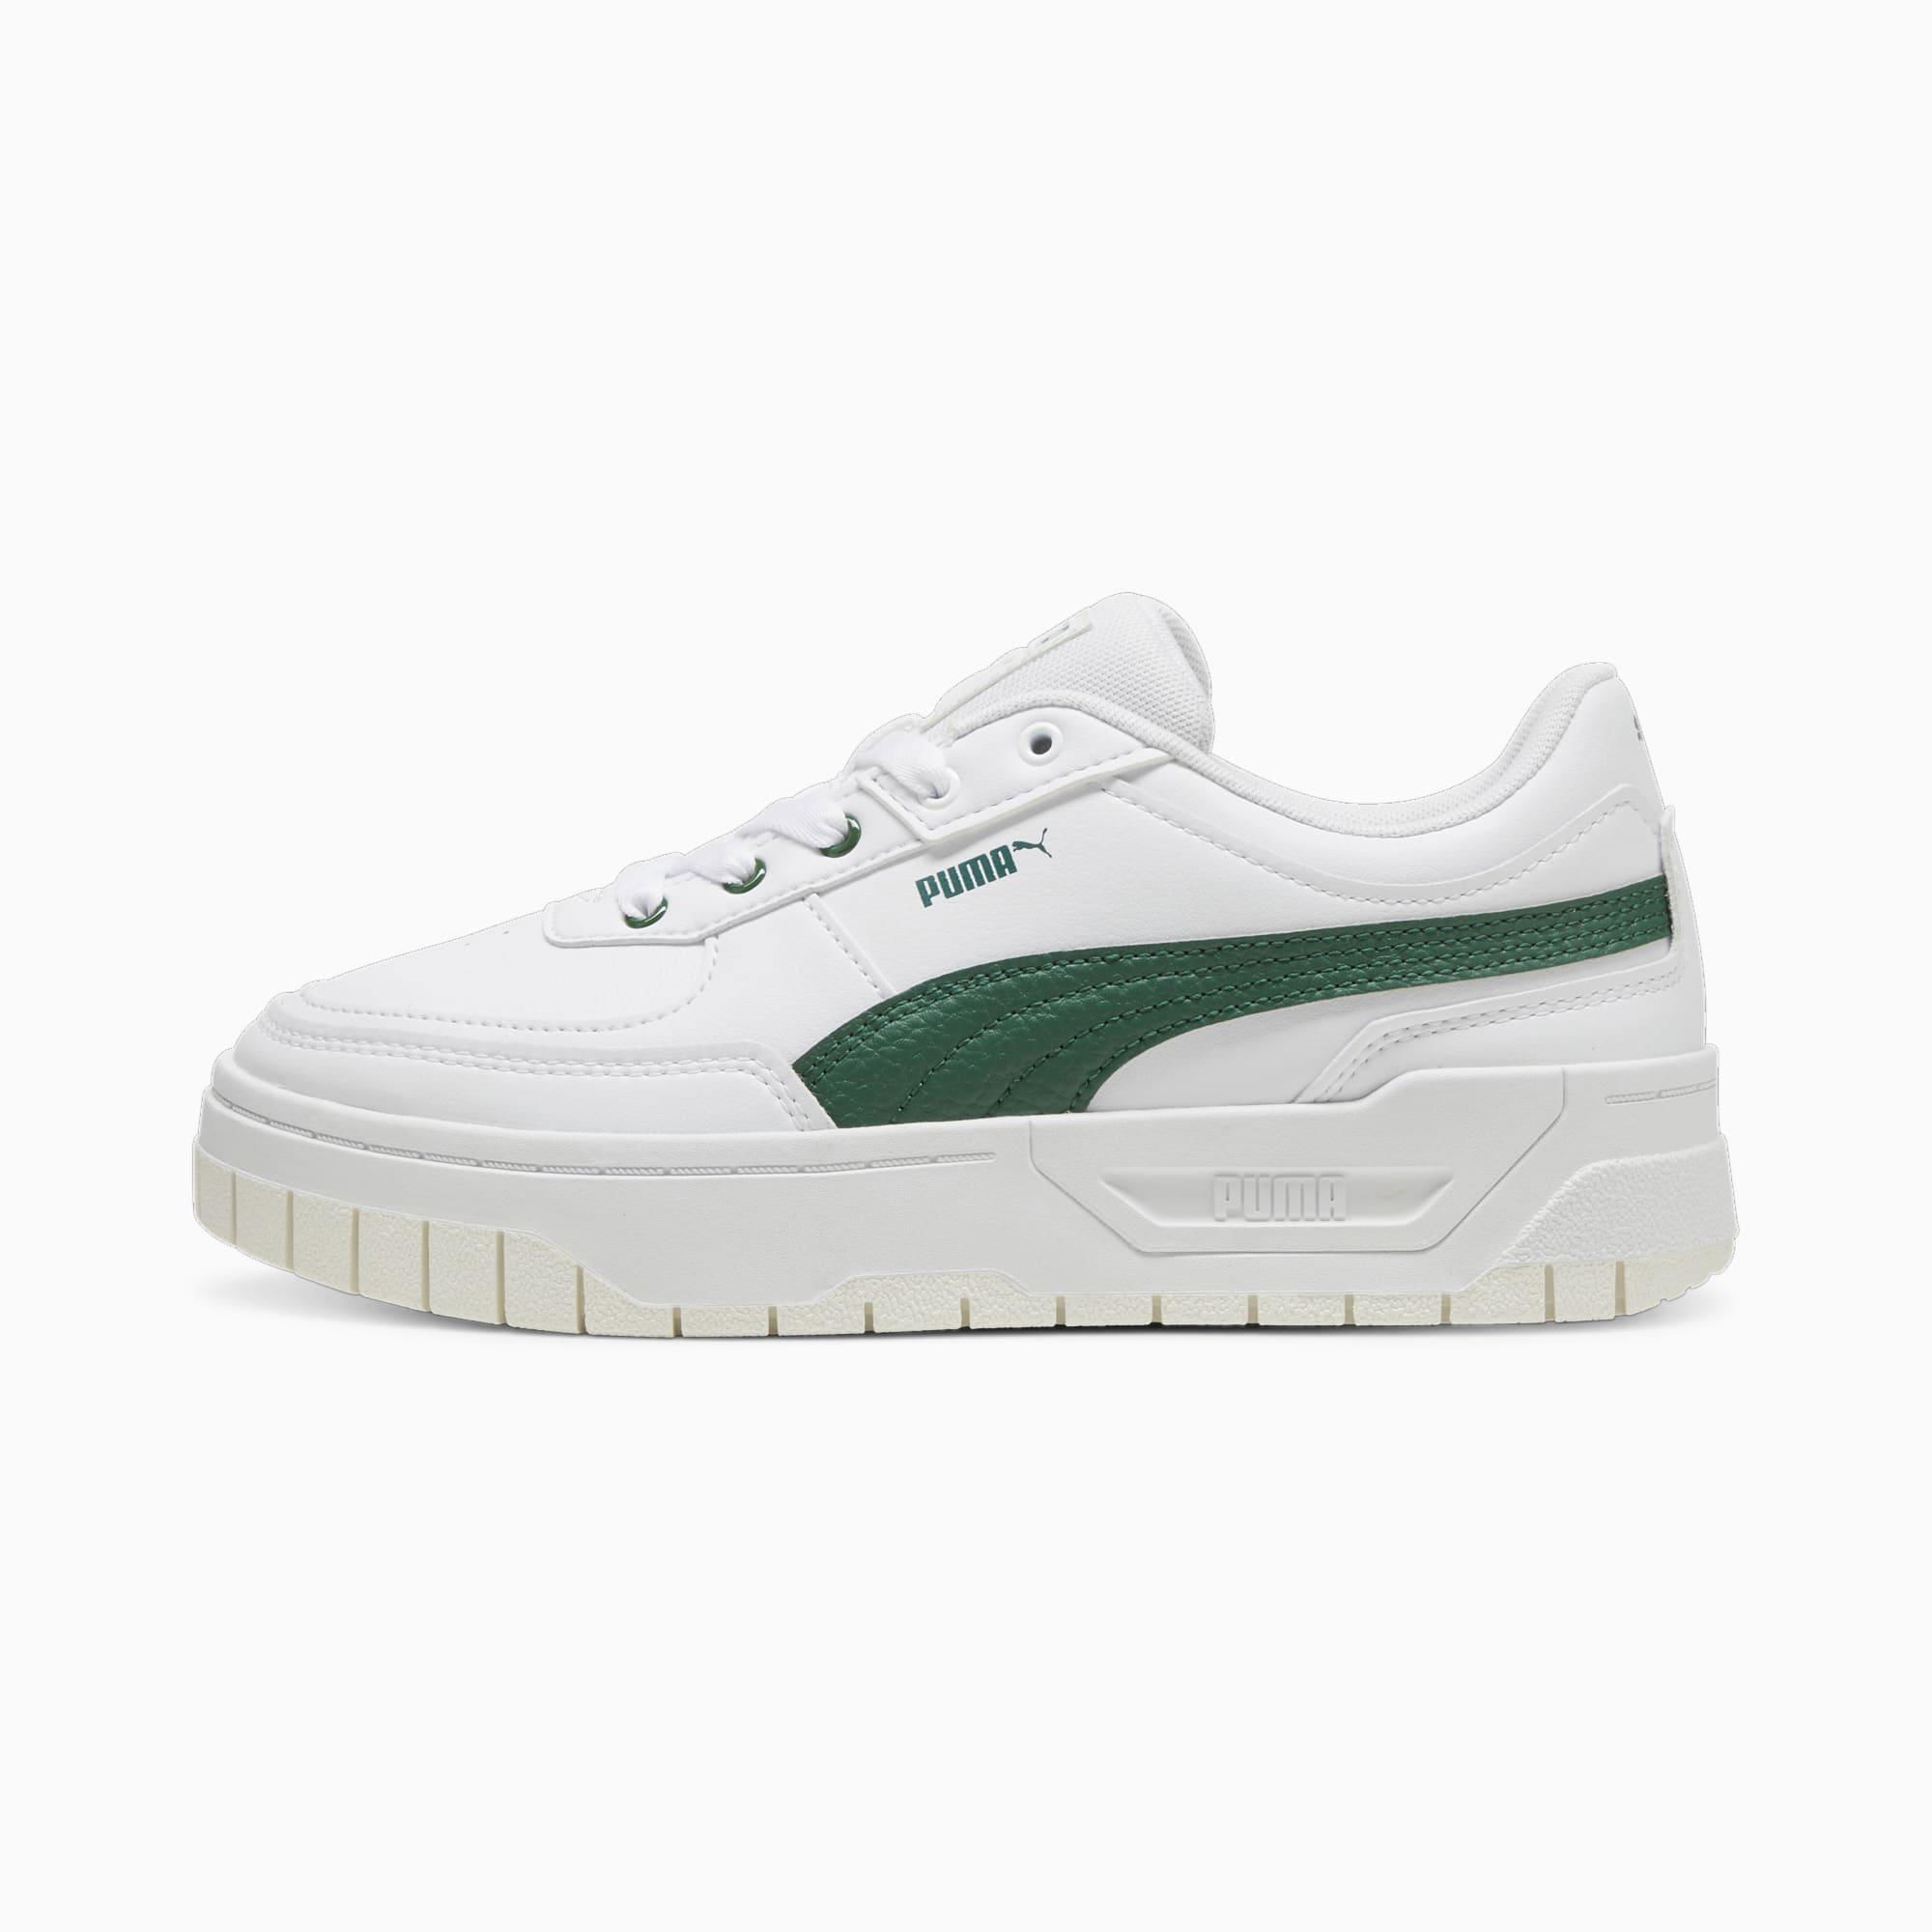 Cali Dream West Coast Leather Women's Sneakers by PUMA